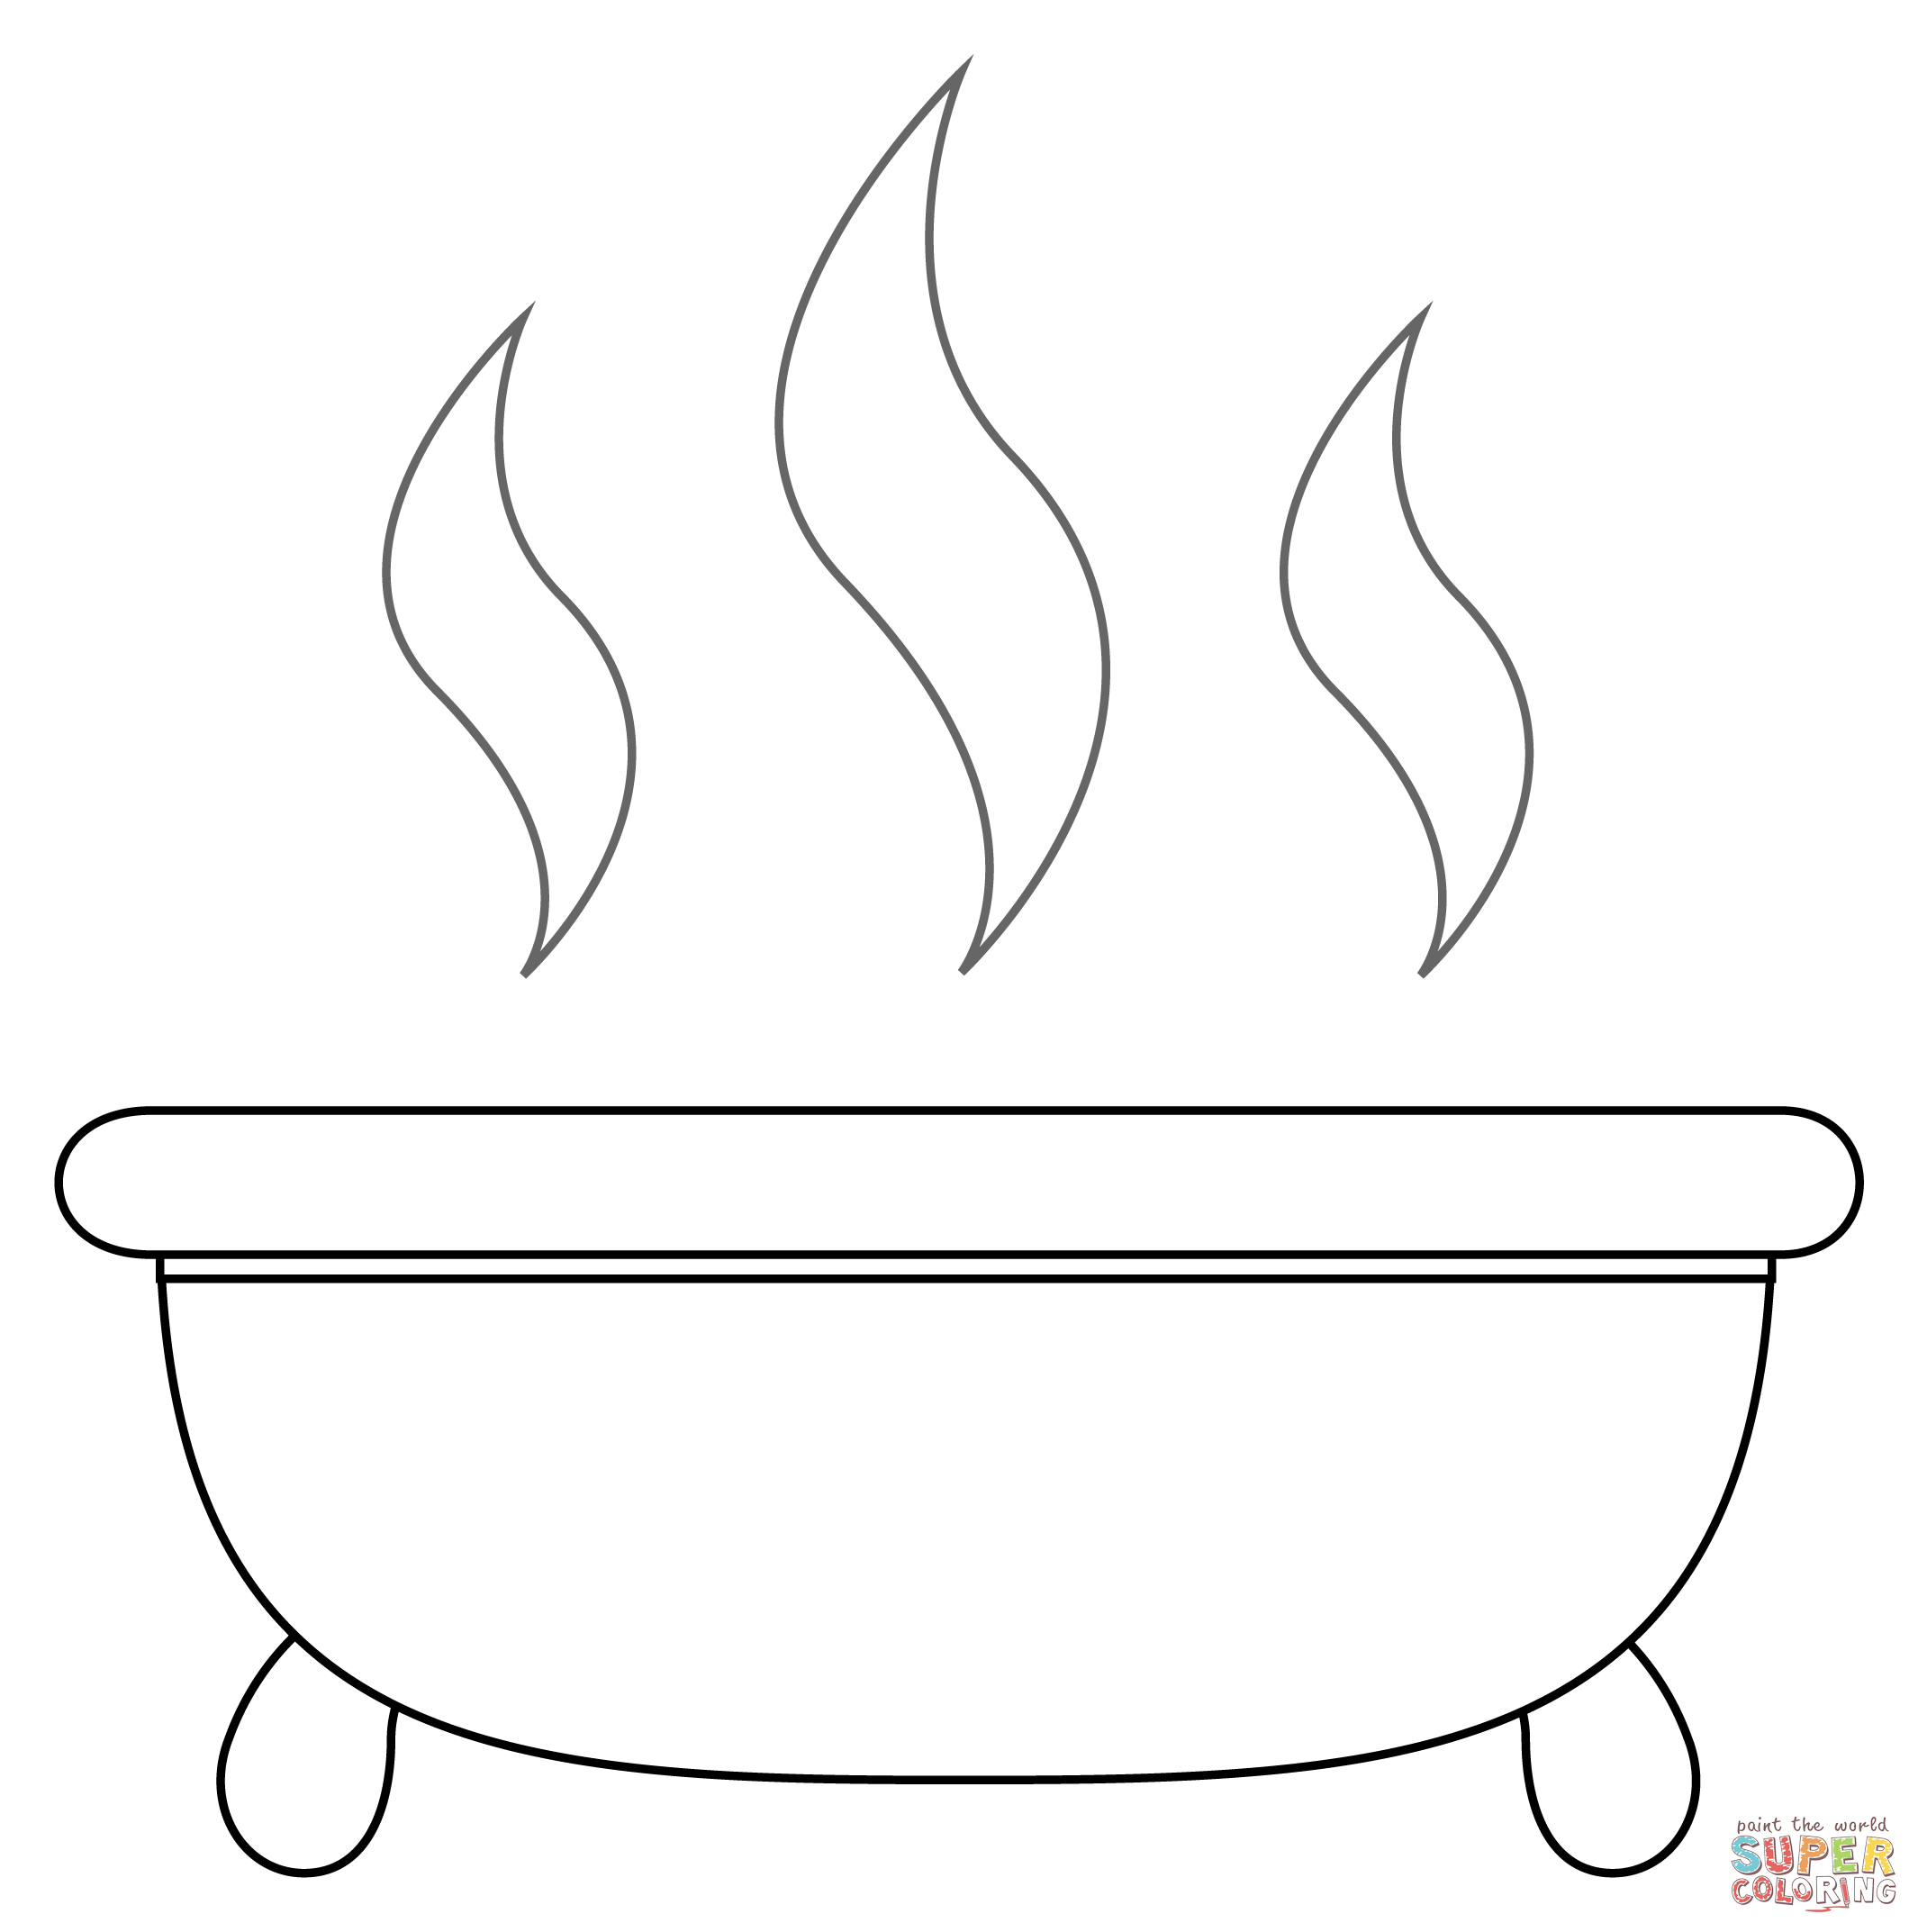 Bathtub coloring page | Free Printable Coloring Pages